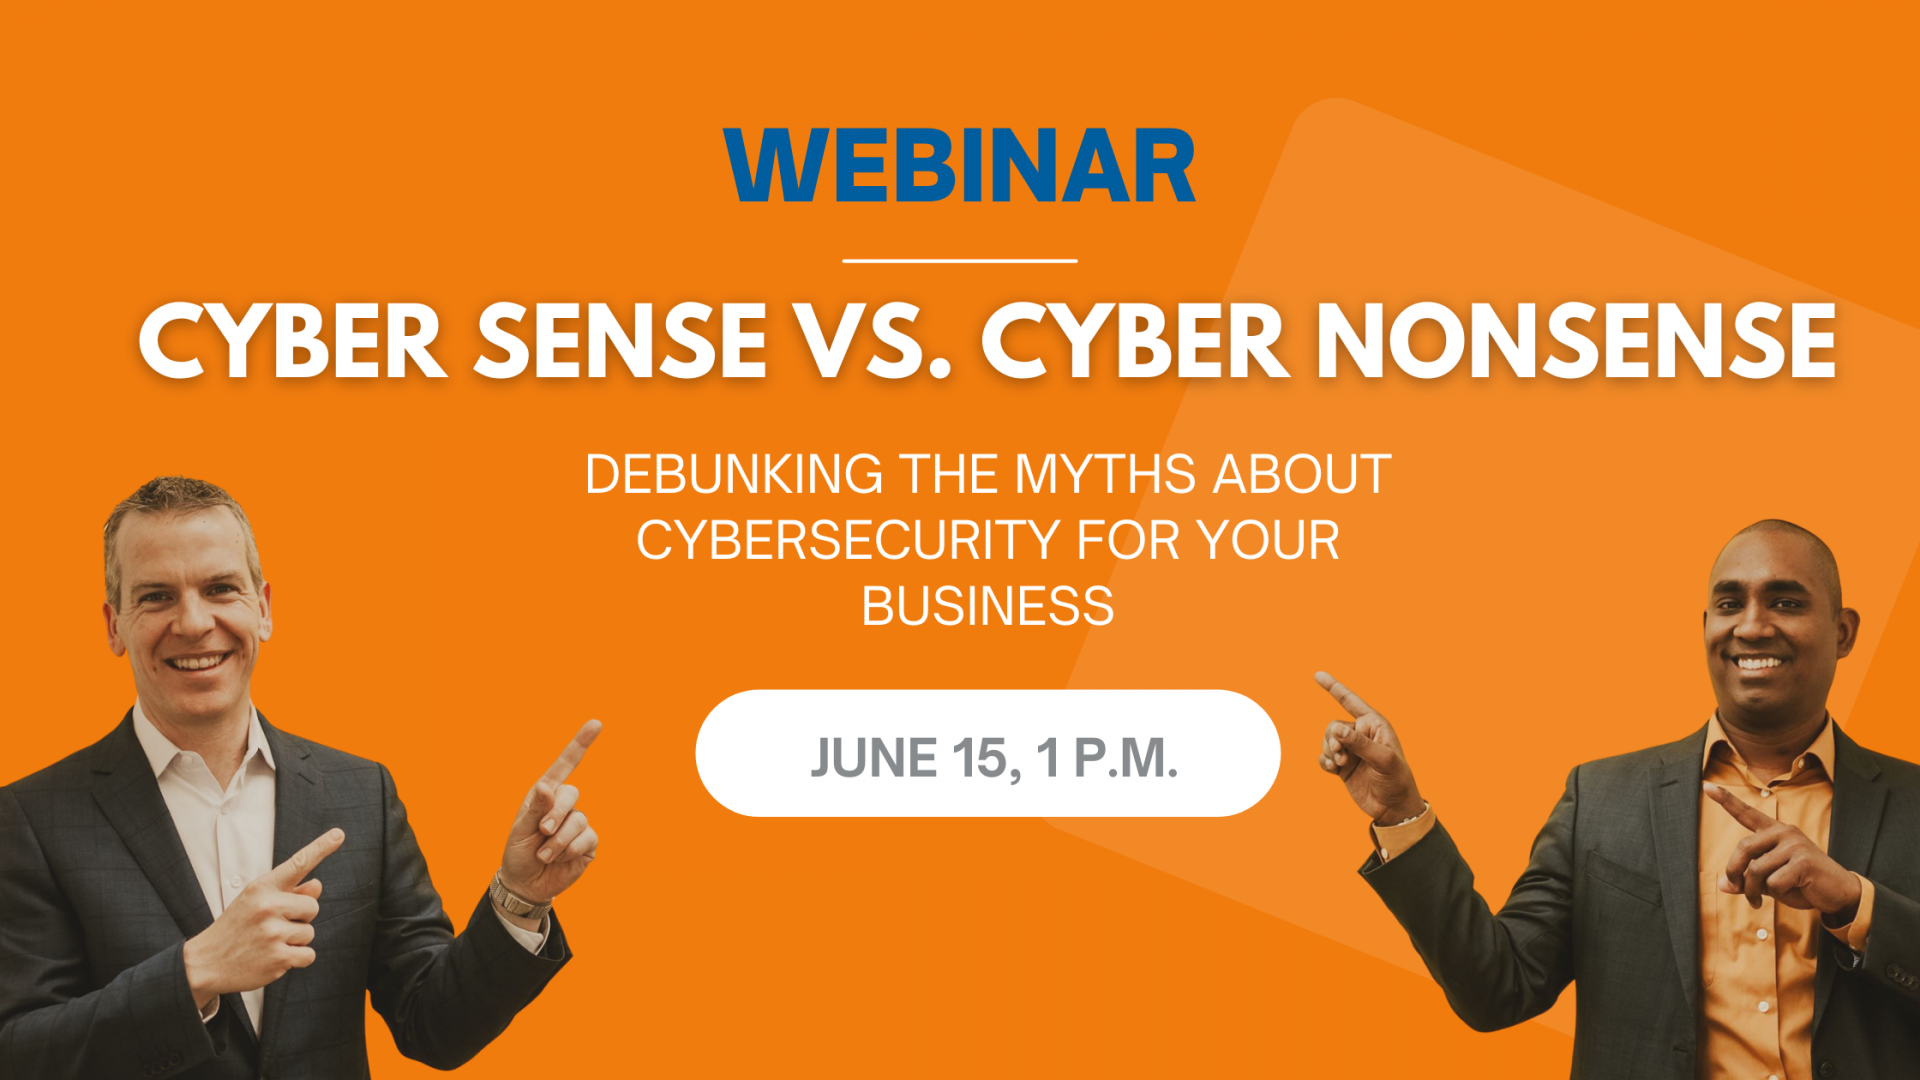 June 2022 Webinar Image - featuring Brendan and Jermaine pointing at the title: Cyber Sense vs. Cyber Nonsense